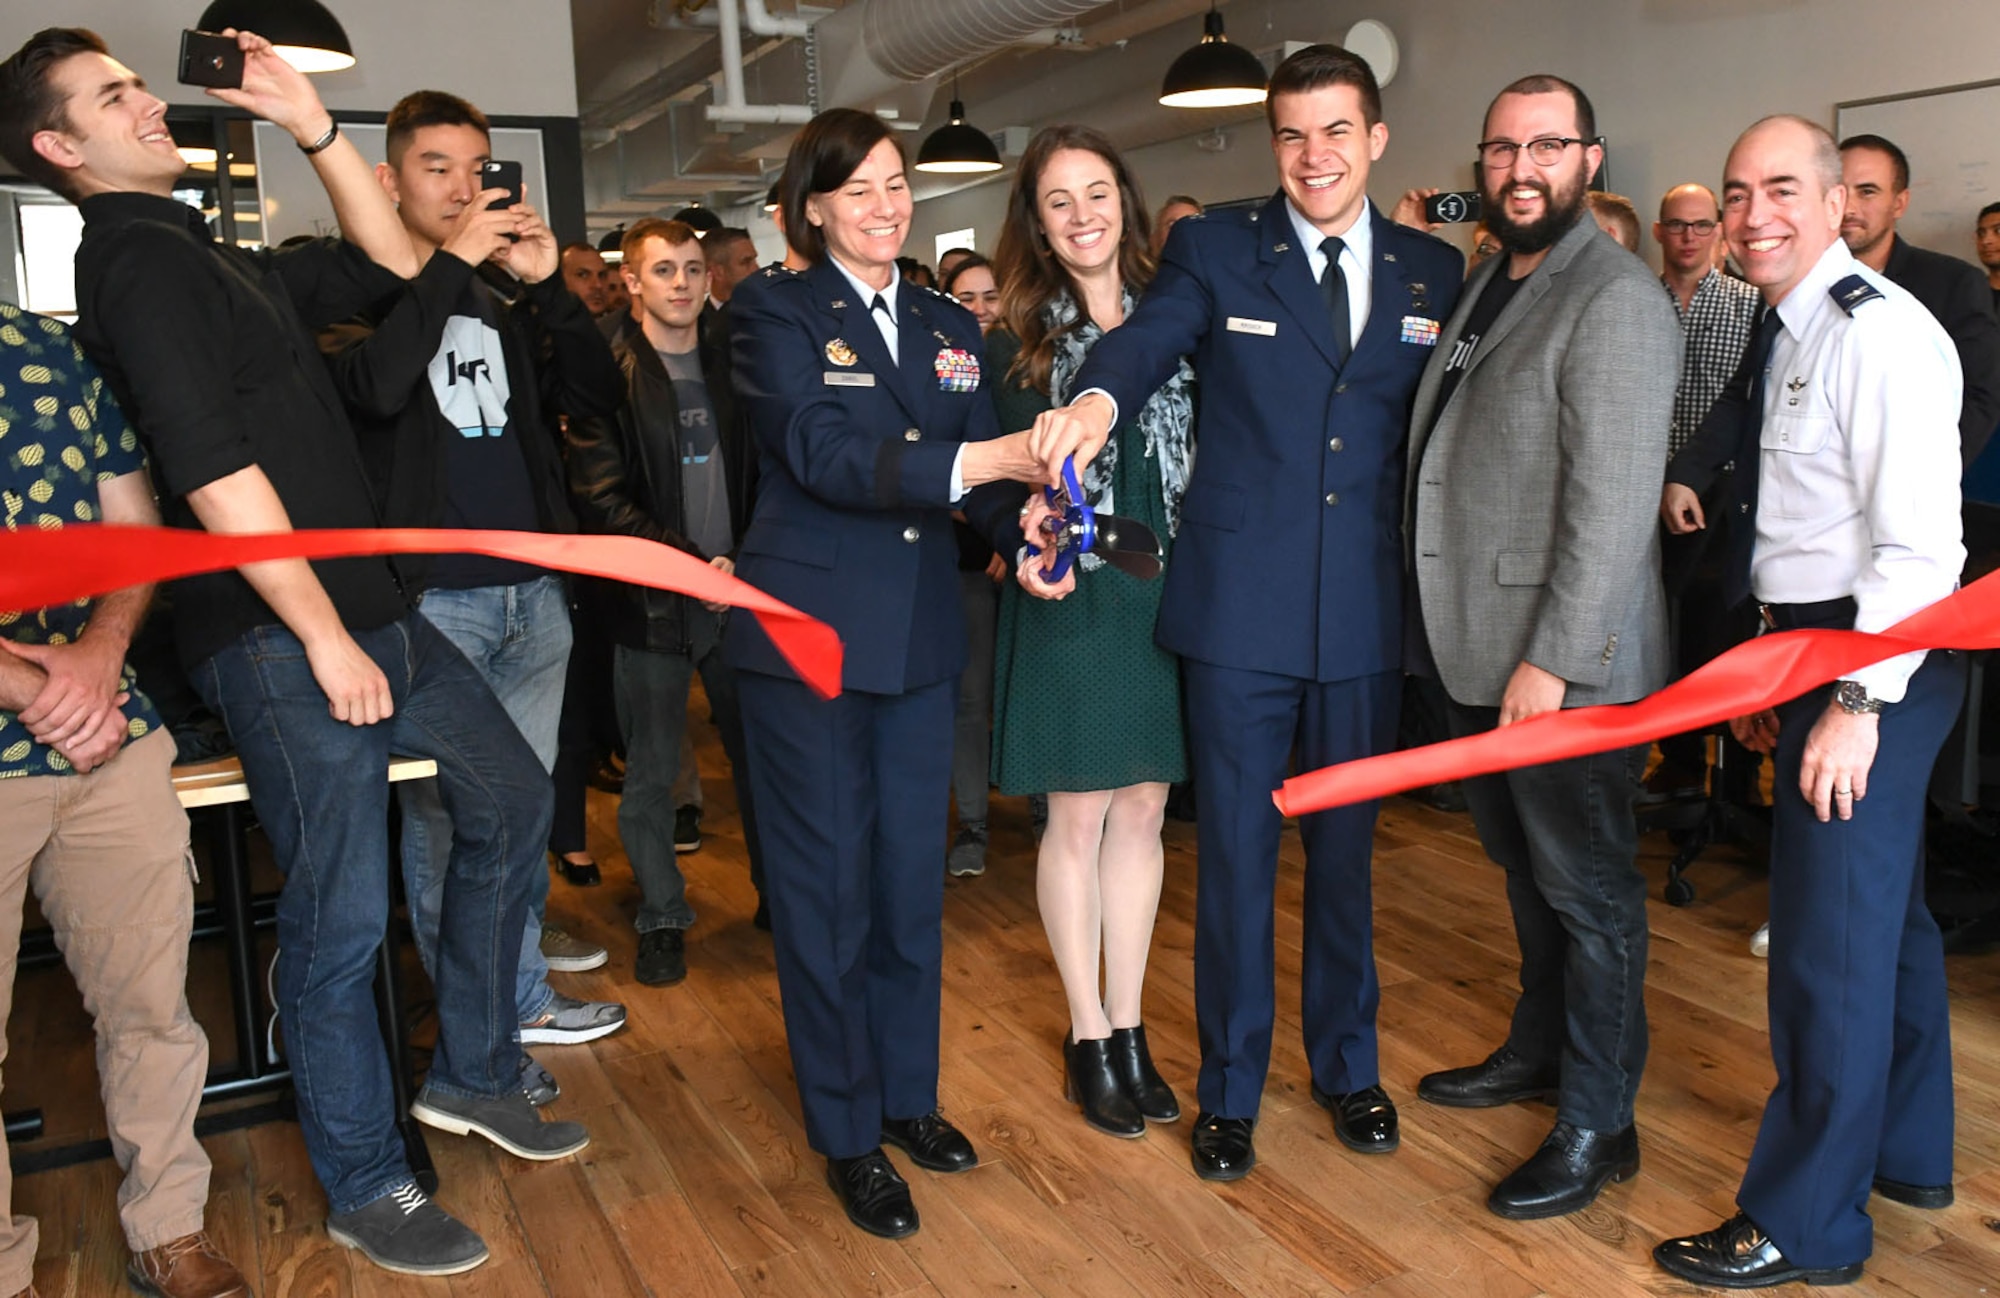 Maj. Gen. Sarah Zabel, the Air Force’s director of Information Technology Acquisition Process Development at the Pentagon, cuts the ribbon for the Kessel Run Experimentation Lab opening in Boston May 7